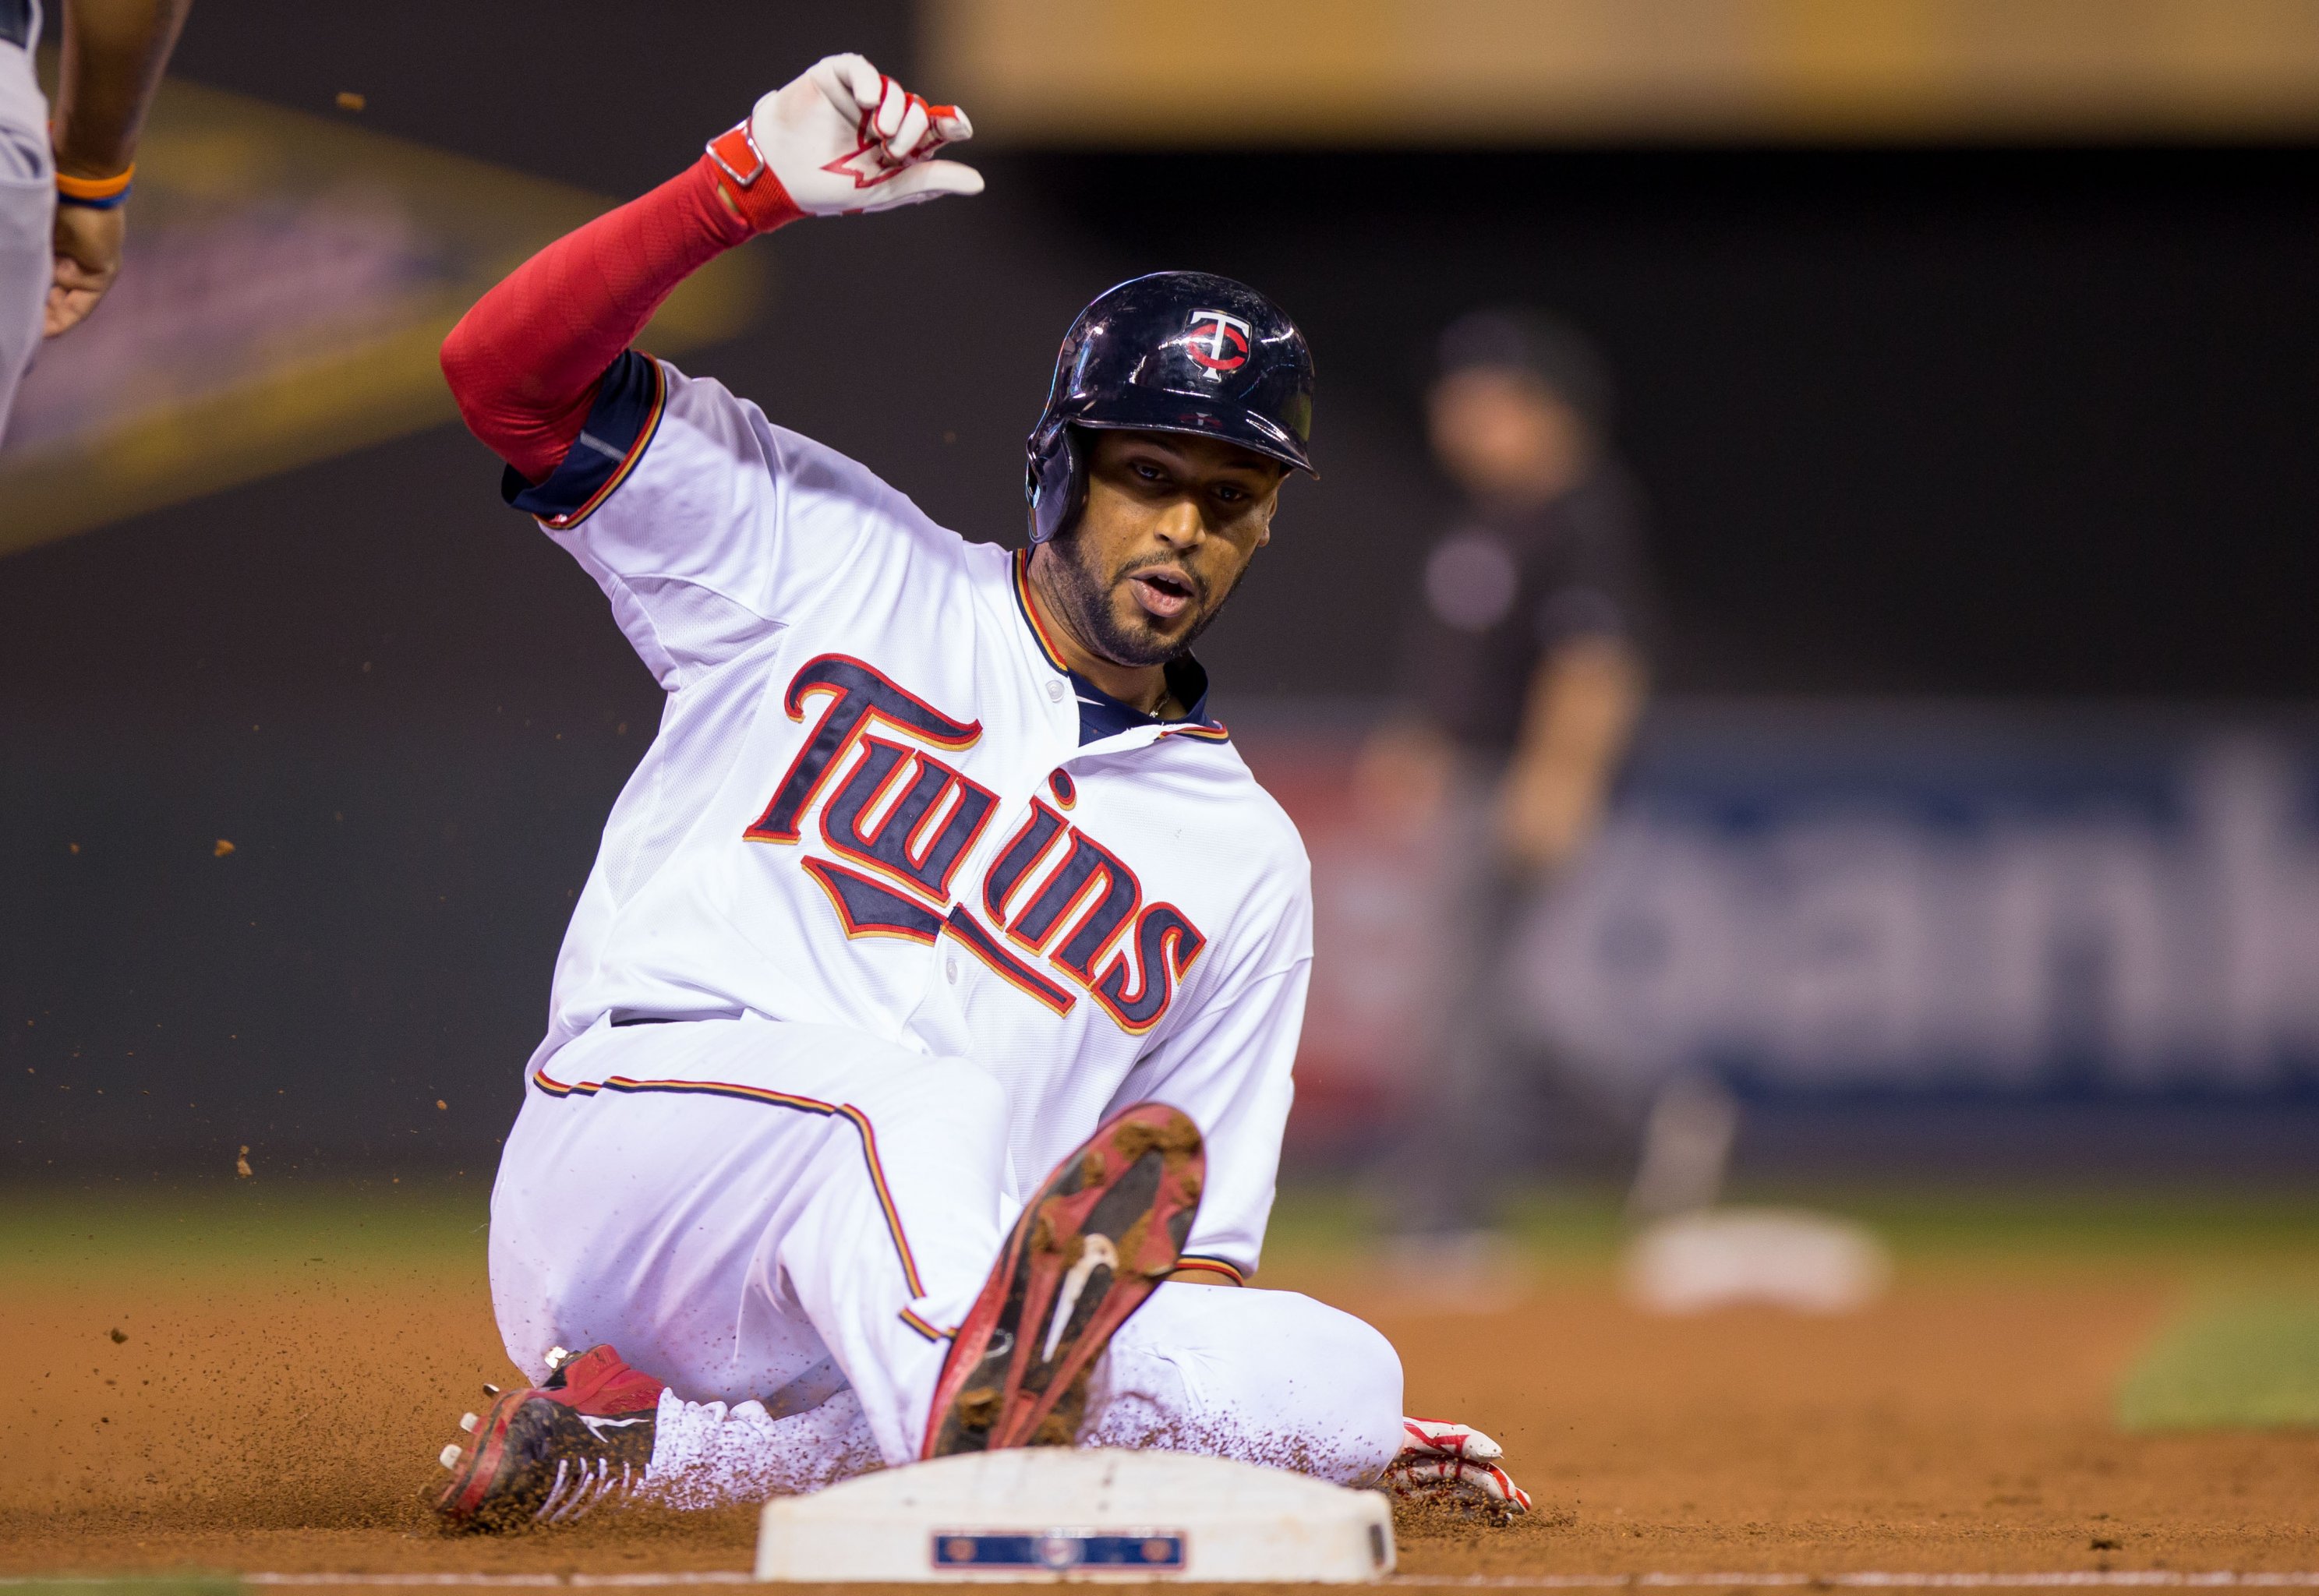 4 Fun Facts About New Twins Outfielder Billy Hamilton - Twins